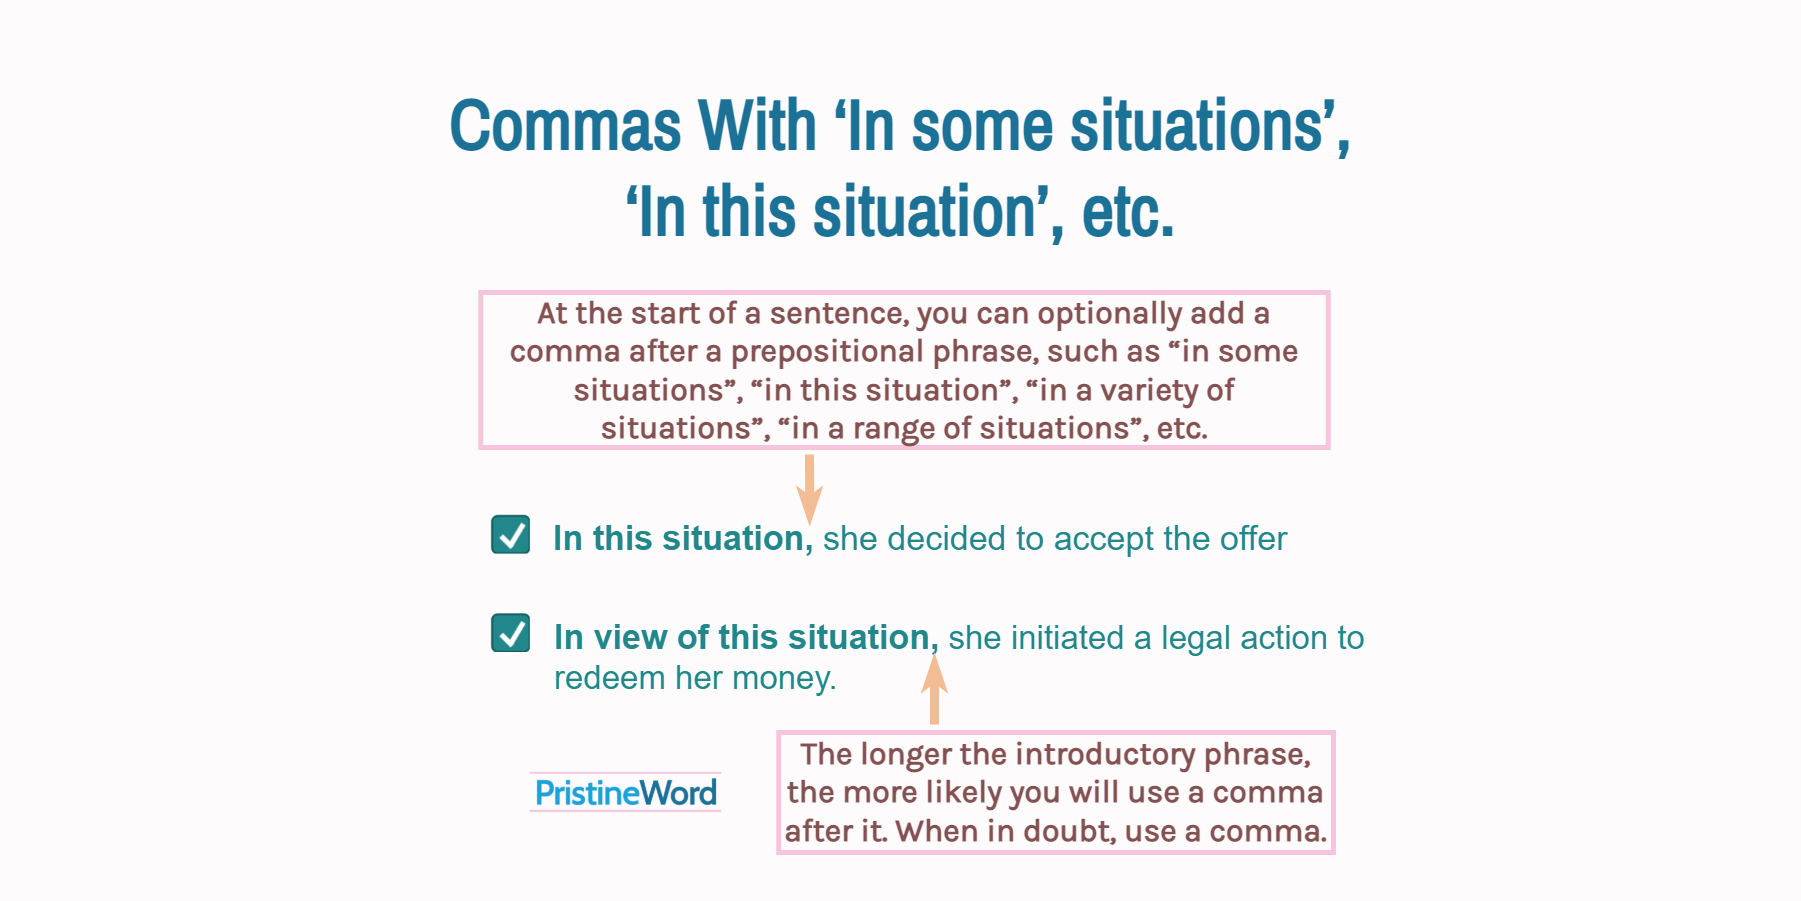 Commas After ‘In some situations’, ‘In this situation’, etc.